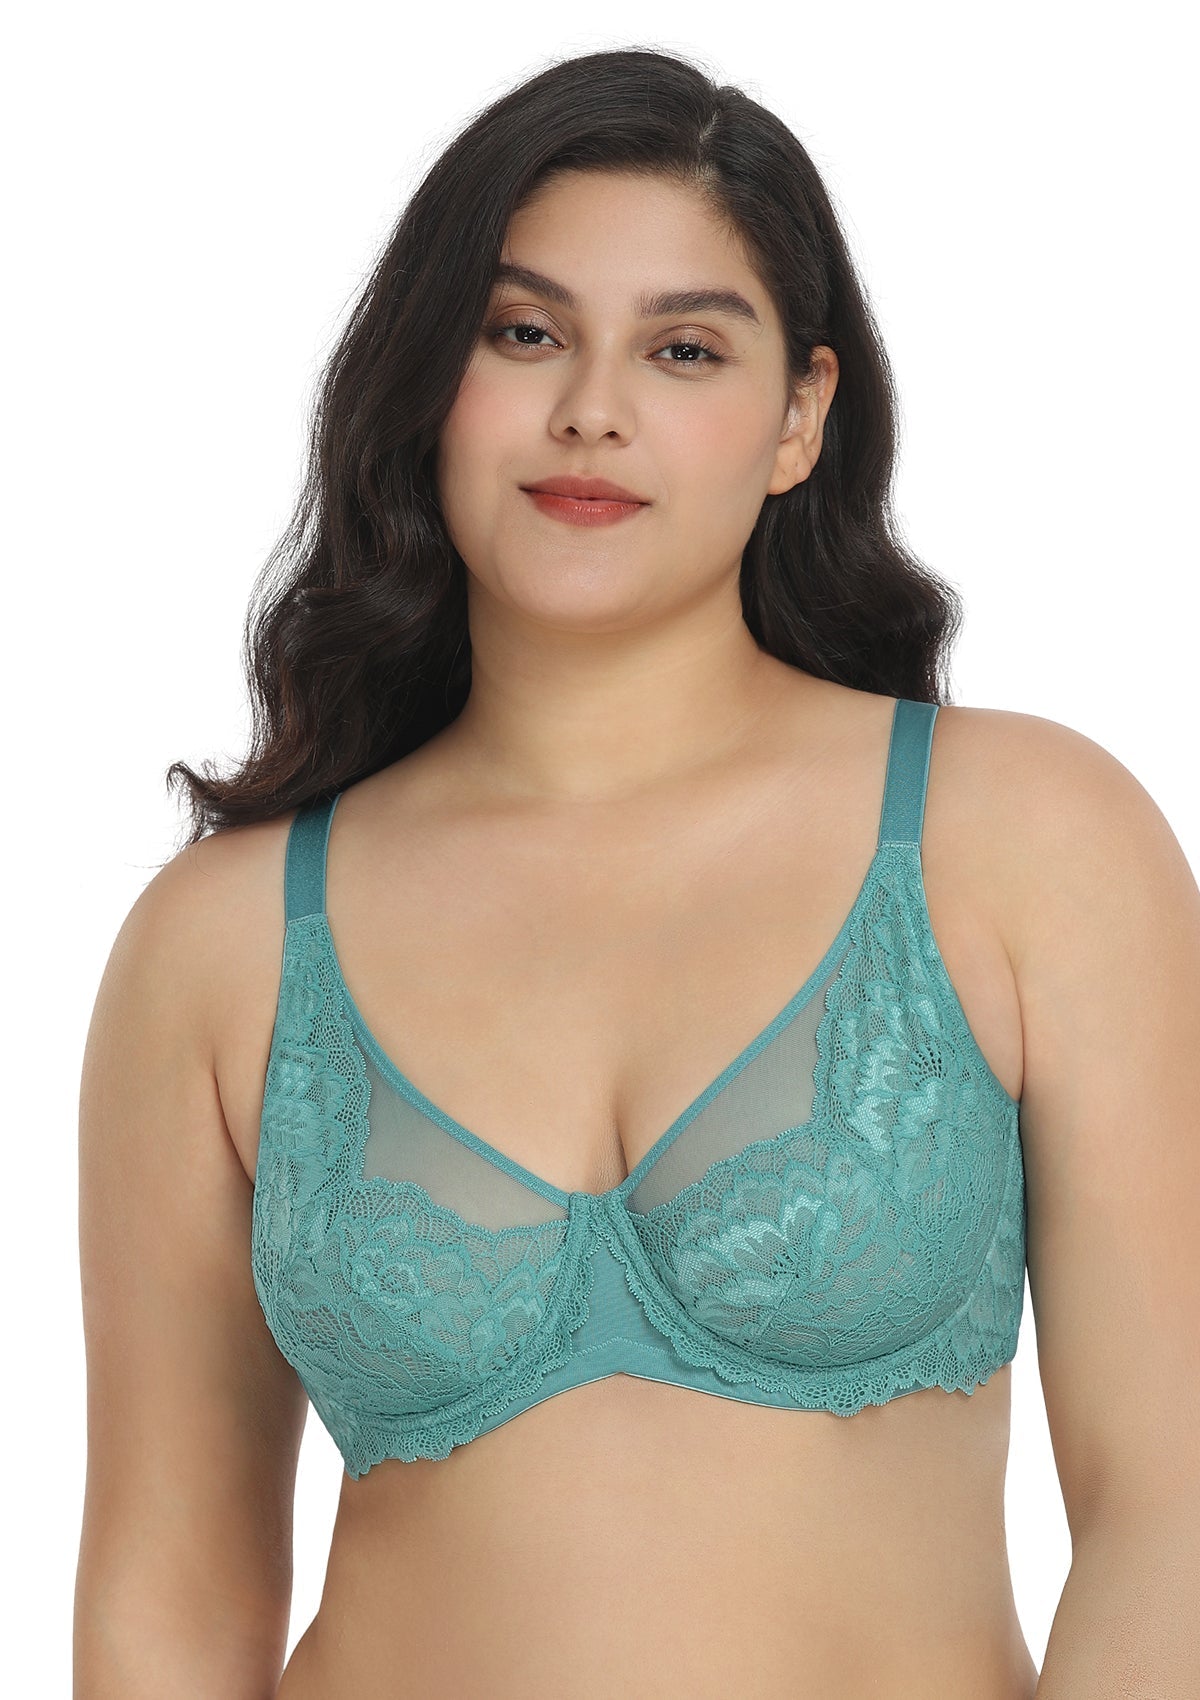 HSIA Paeonia Lace Full Coverage Underwire Non-Padded Uplifting Bra - Light Coral / 42 / C